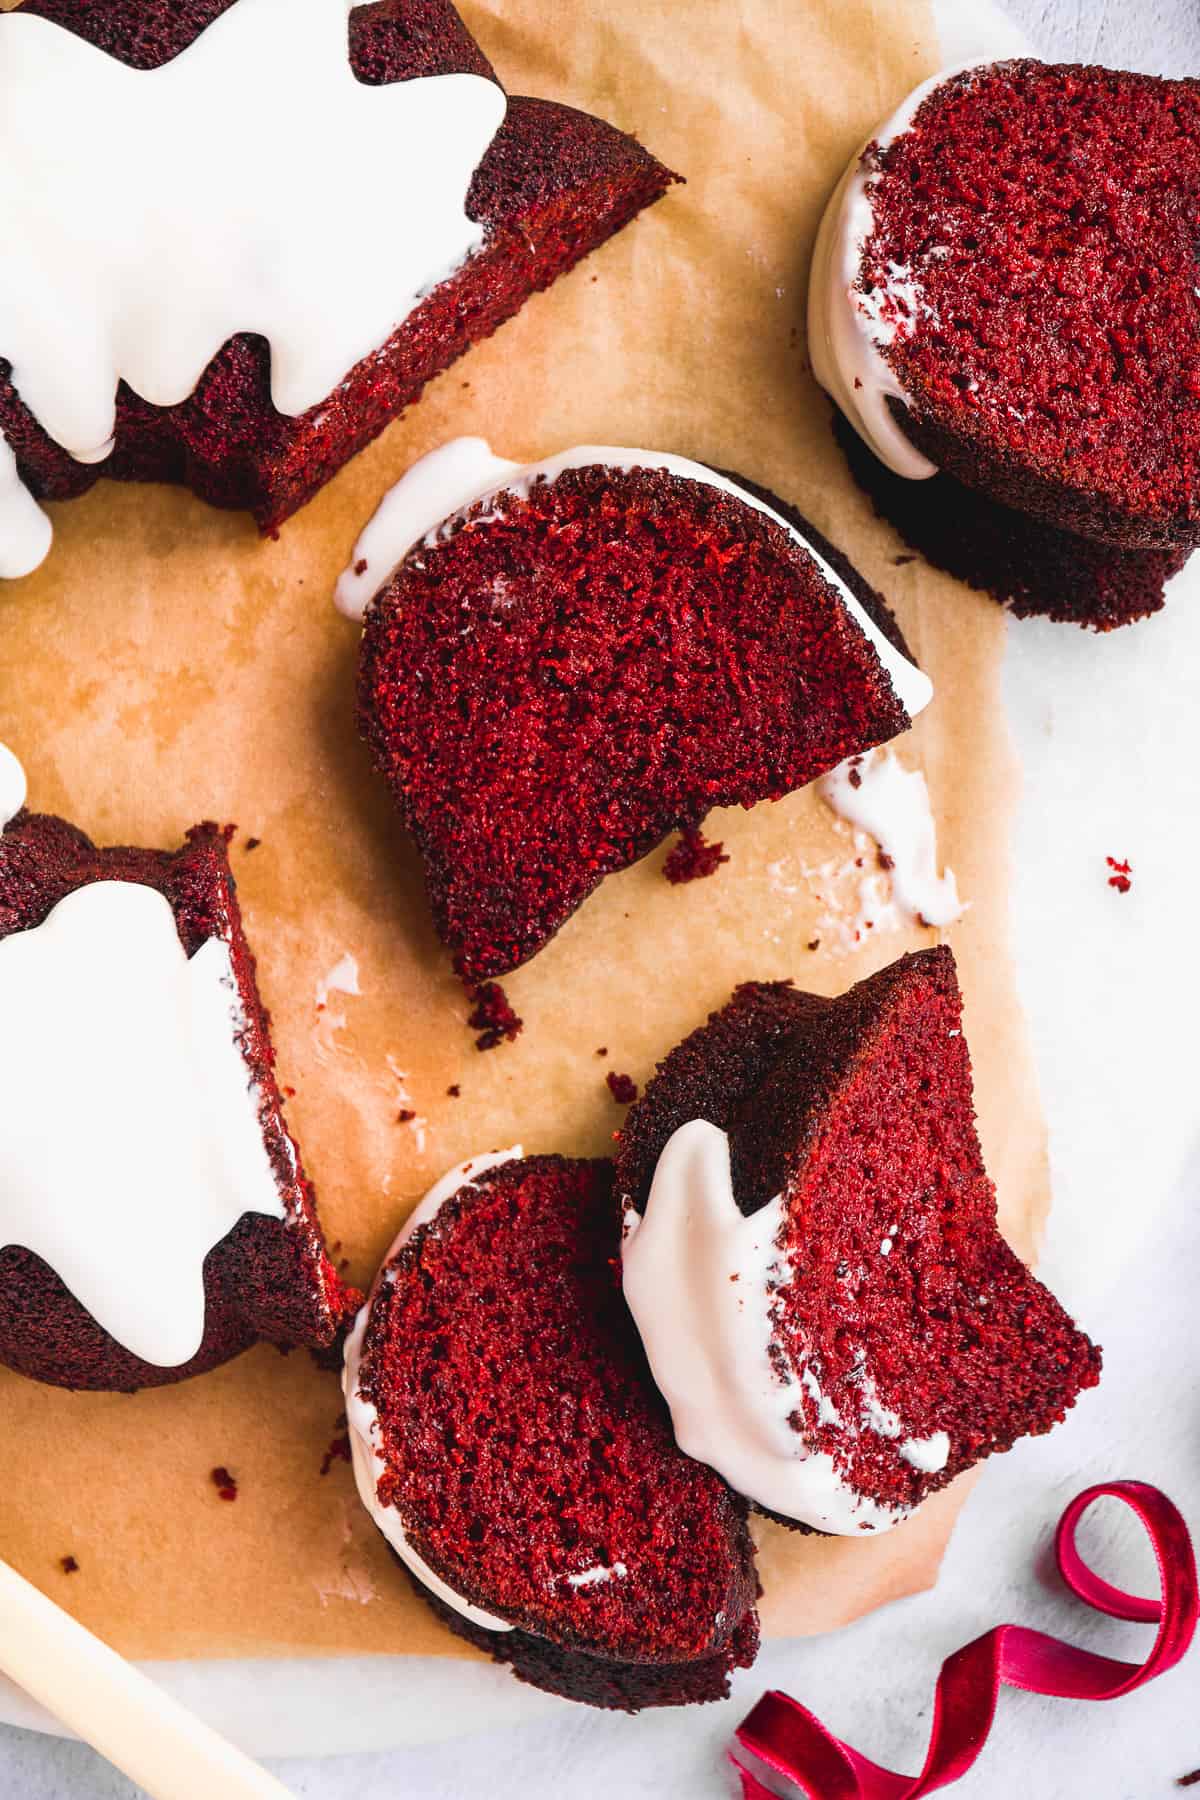 Red velvet bundt cake slices with icing scattered on parchment paper.